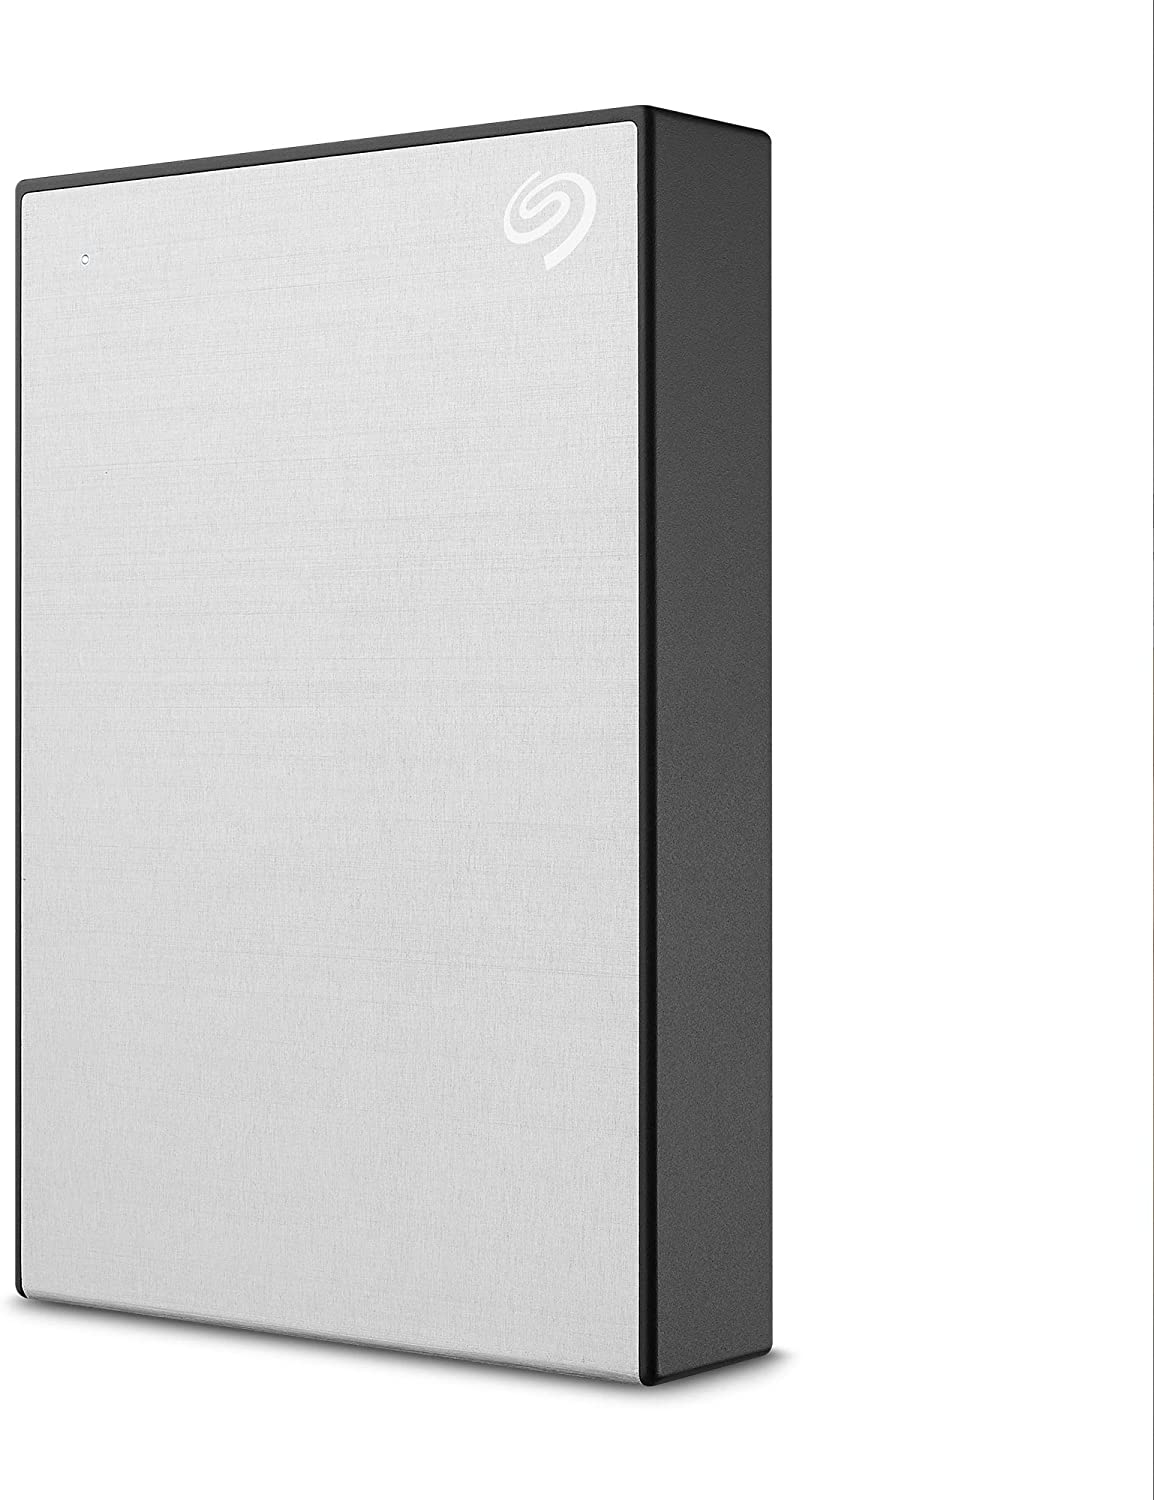 Hard disk extern seagate one touch 1tb usb 3.0 silver